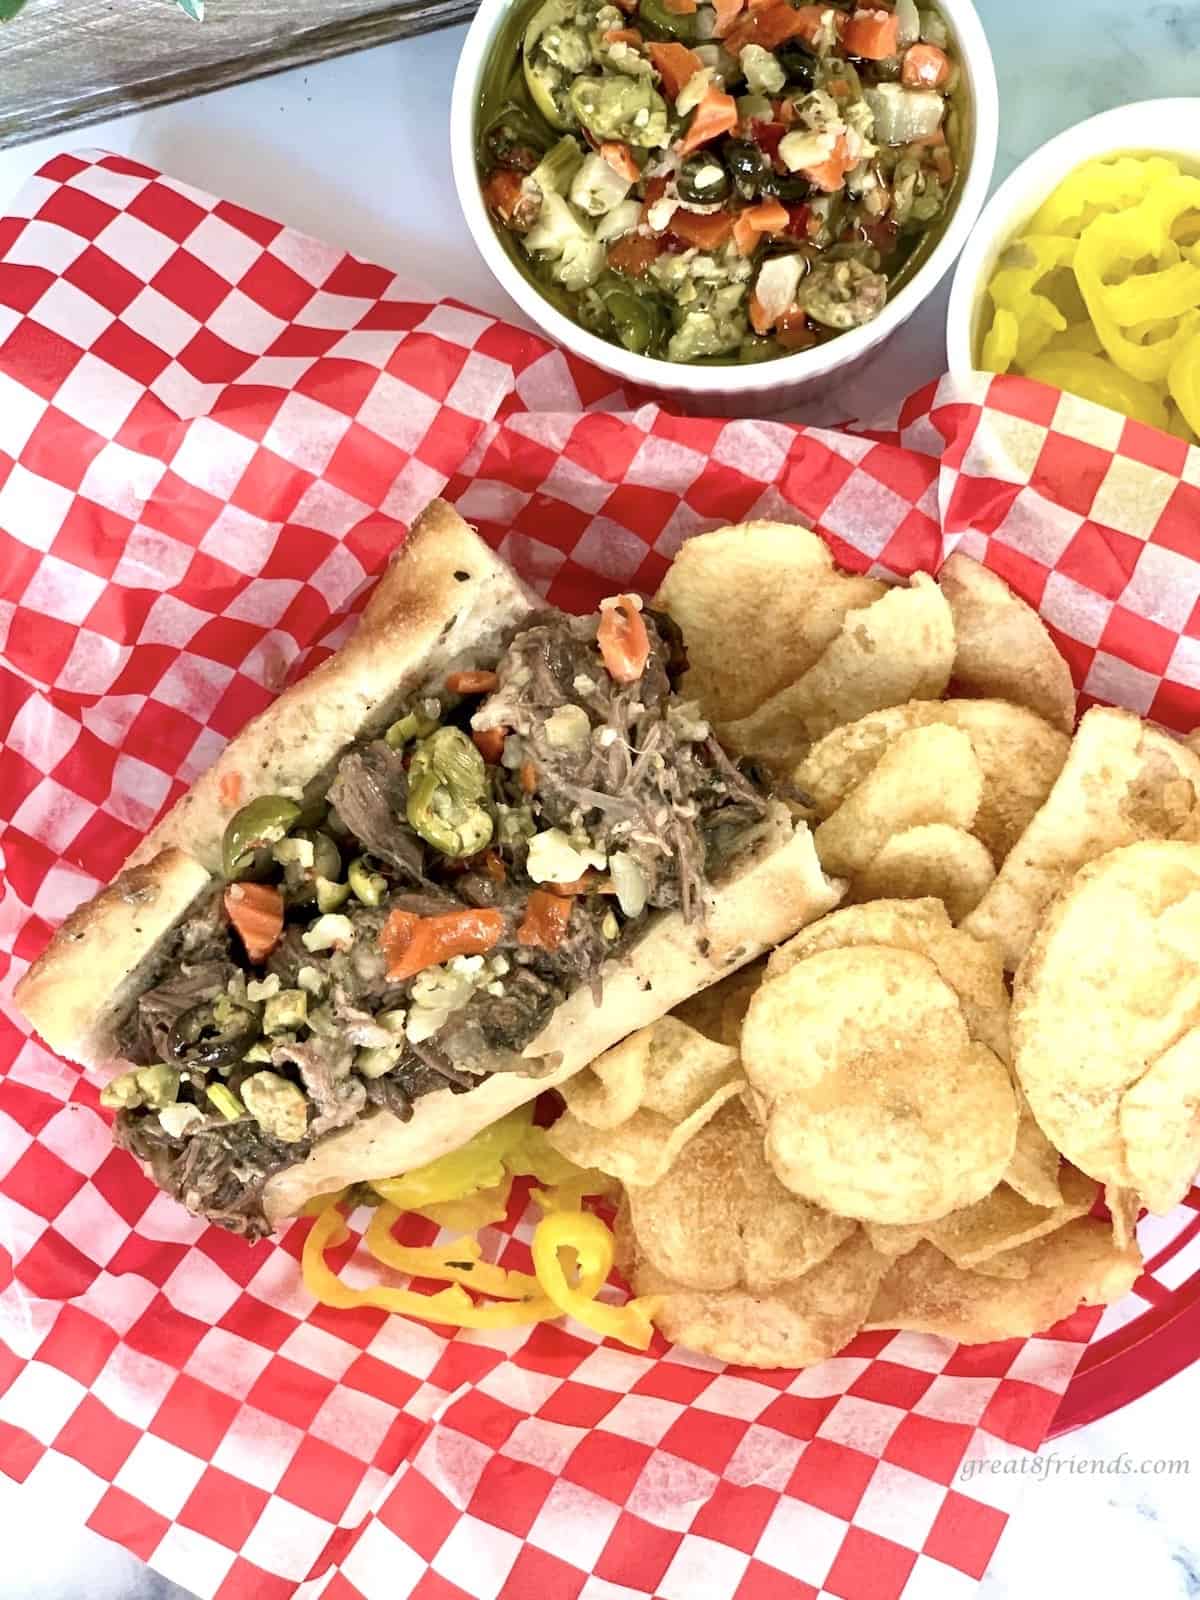 Italian Beef Sandwich in a basket with a red and white paper liner and potato chips, peppers and Giardiniera on the side